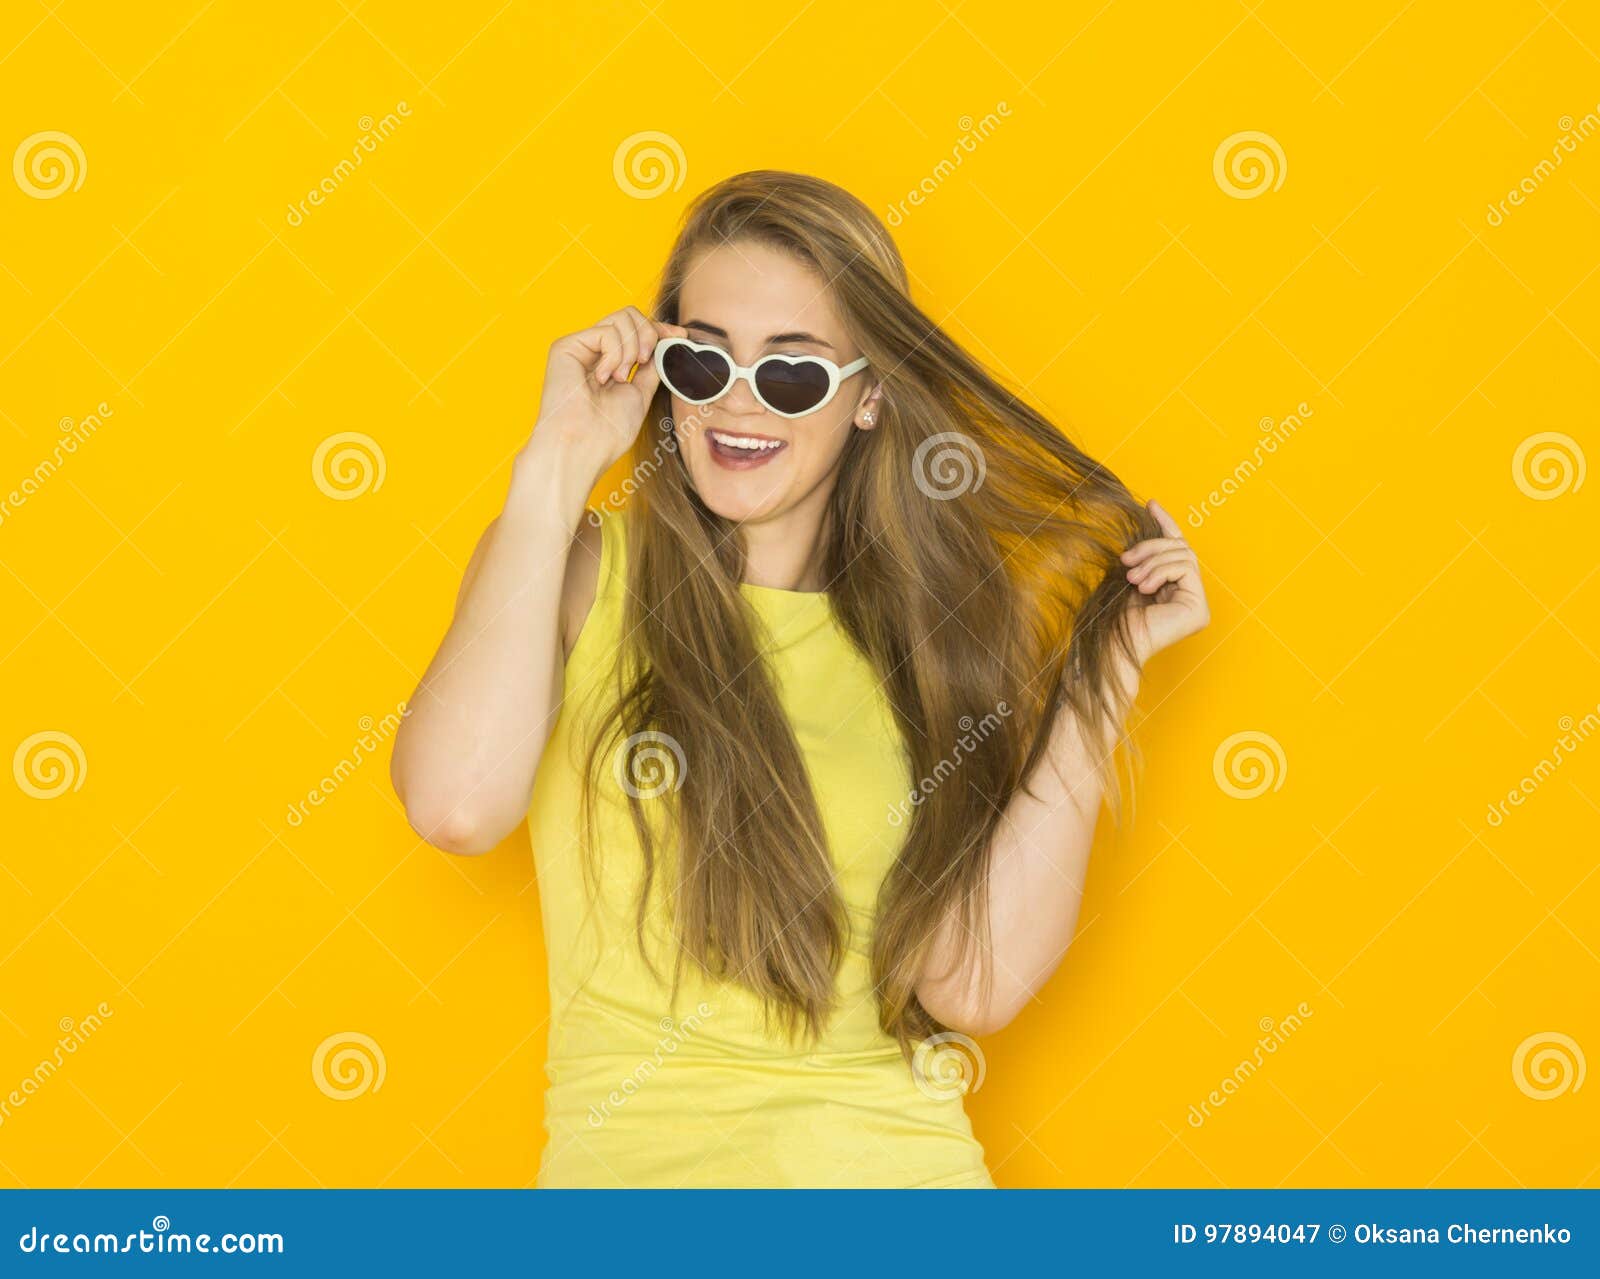 Colorful Portrait Of Young Attractive Woman Wearing Sunglasses Summer 